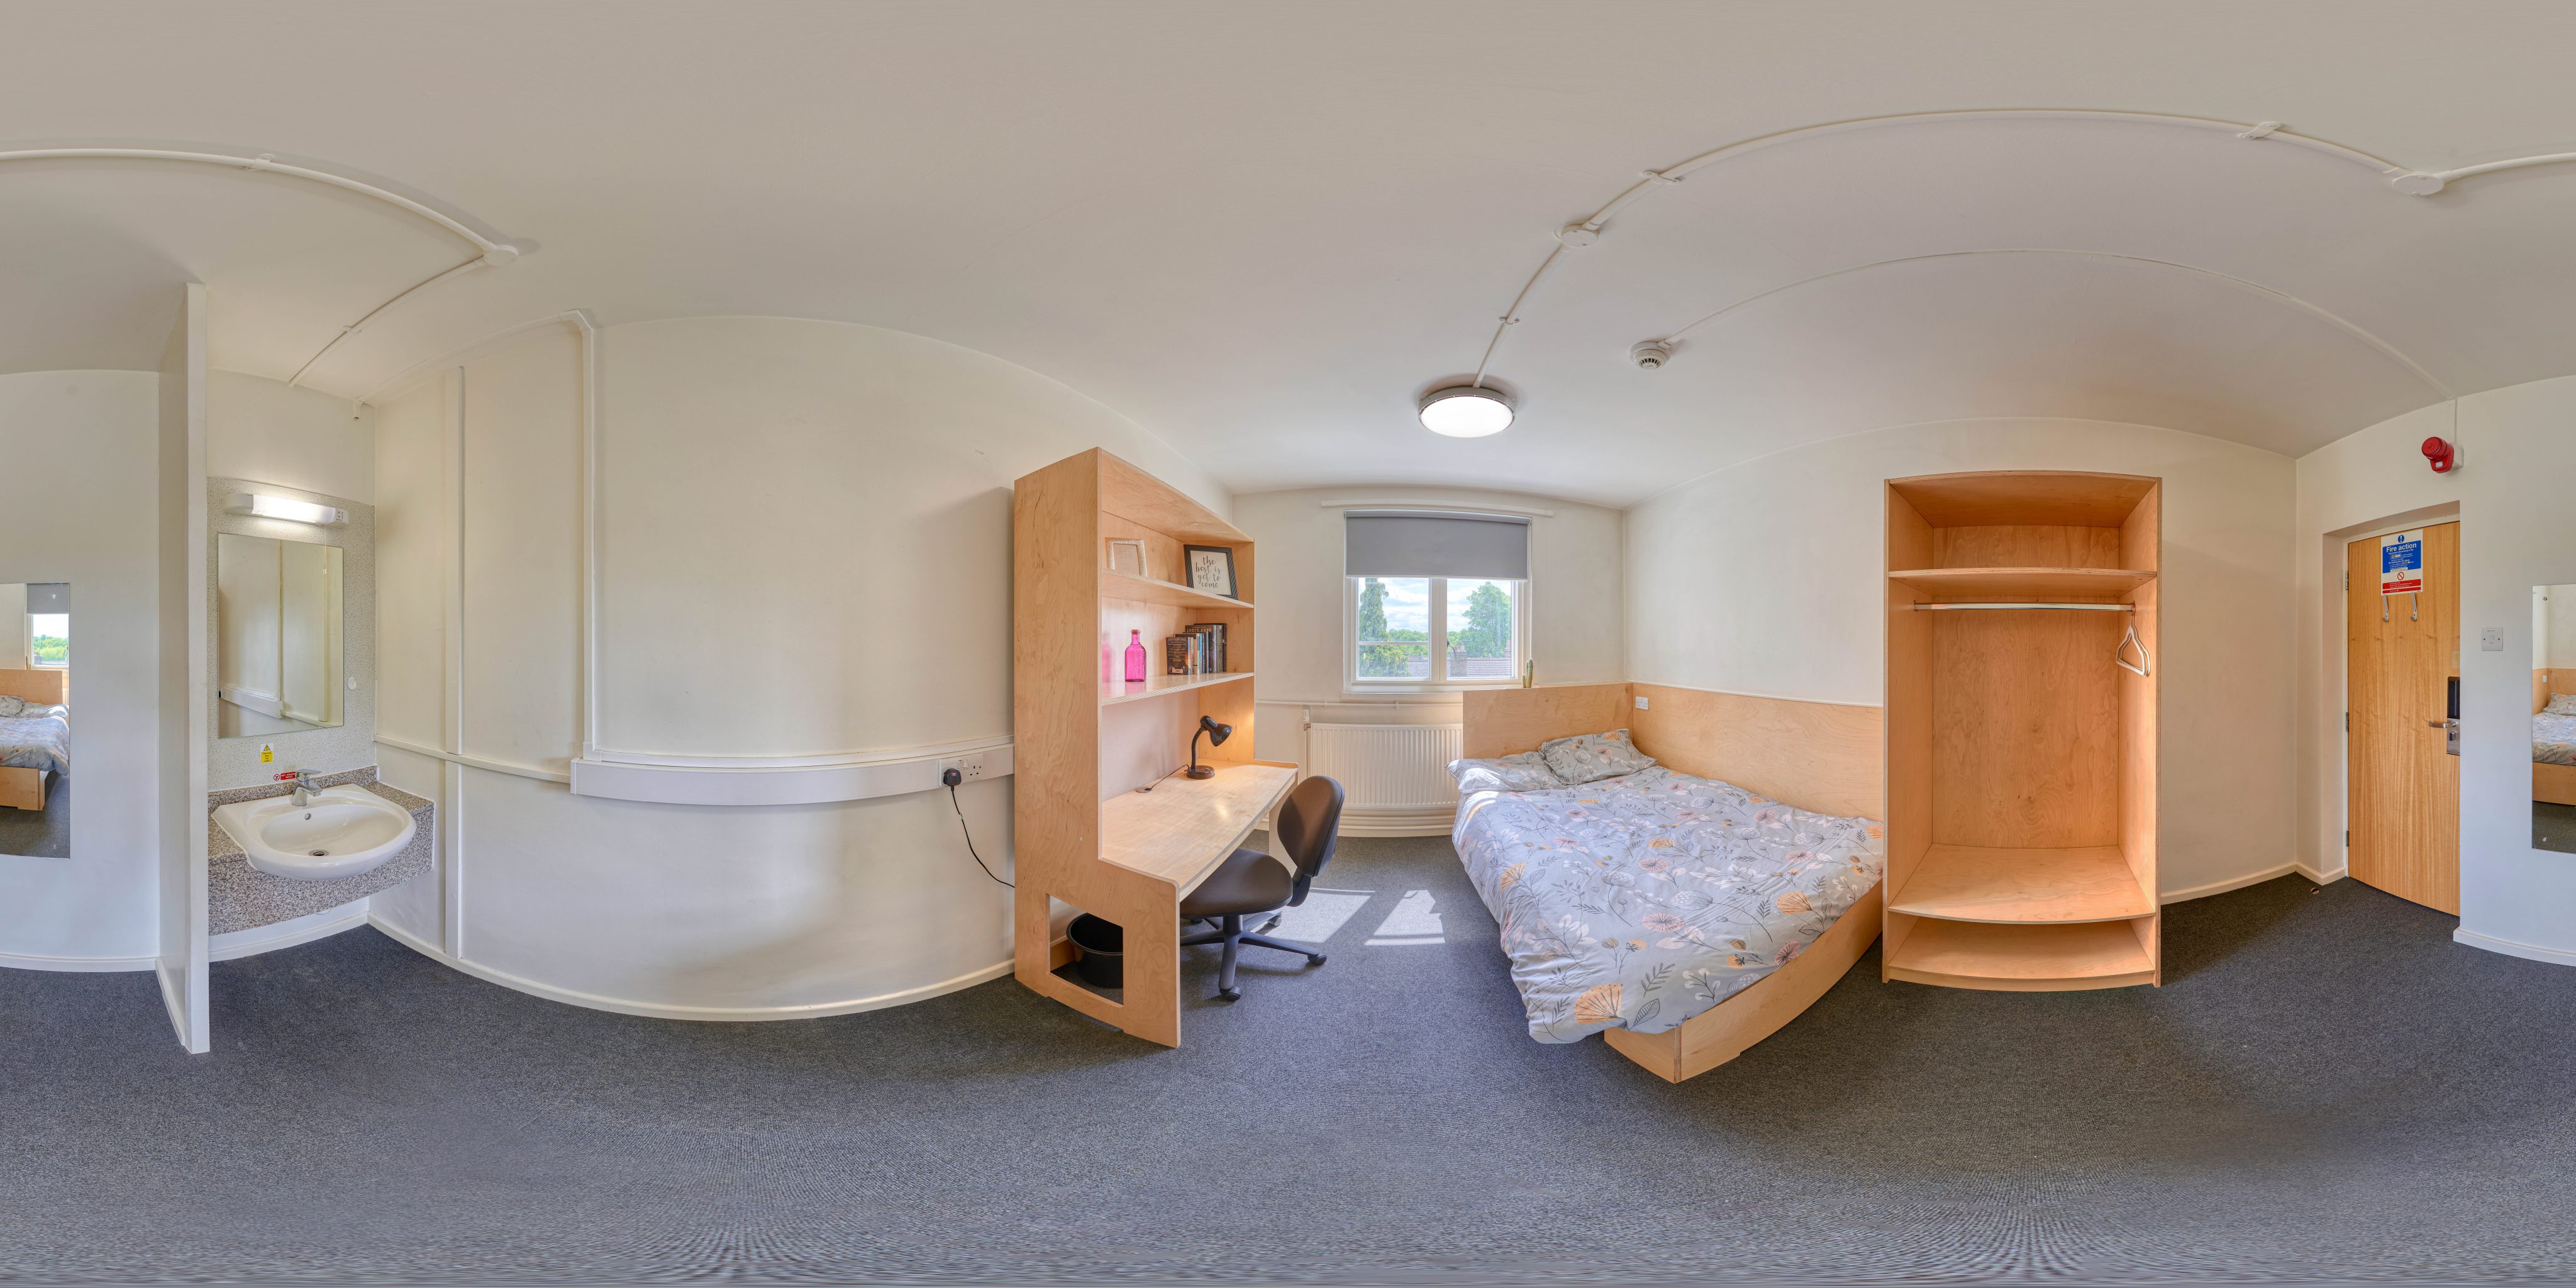 A 360 degree image of a bedroom inside Surrey House